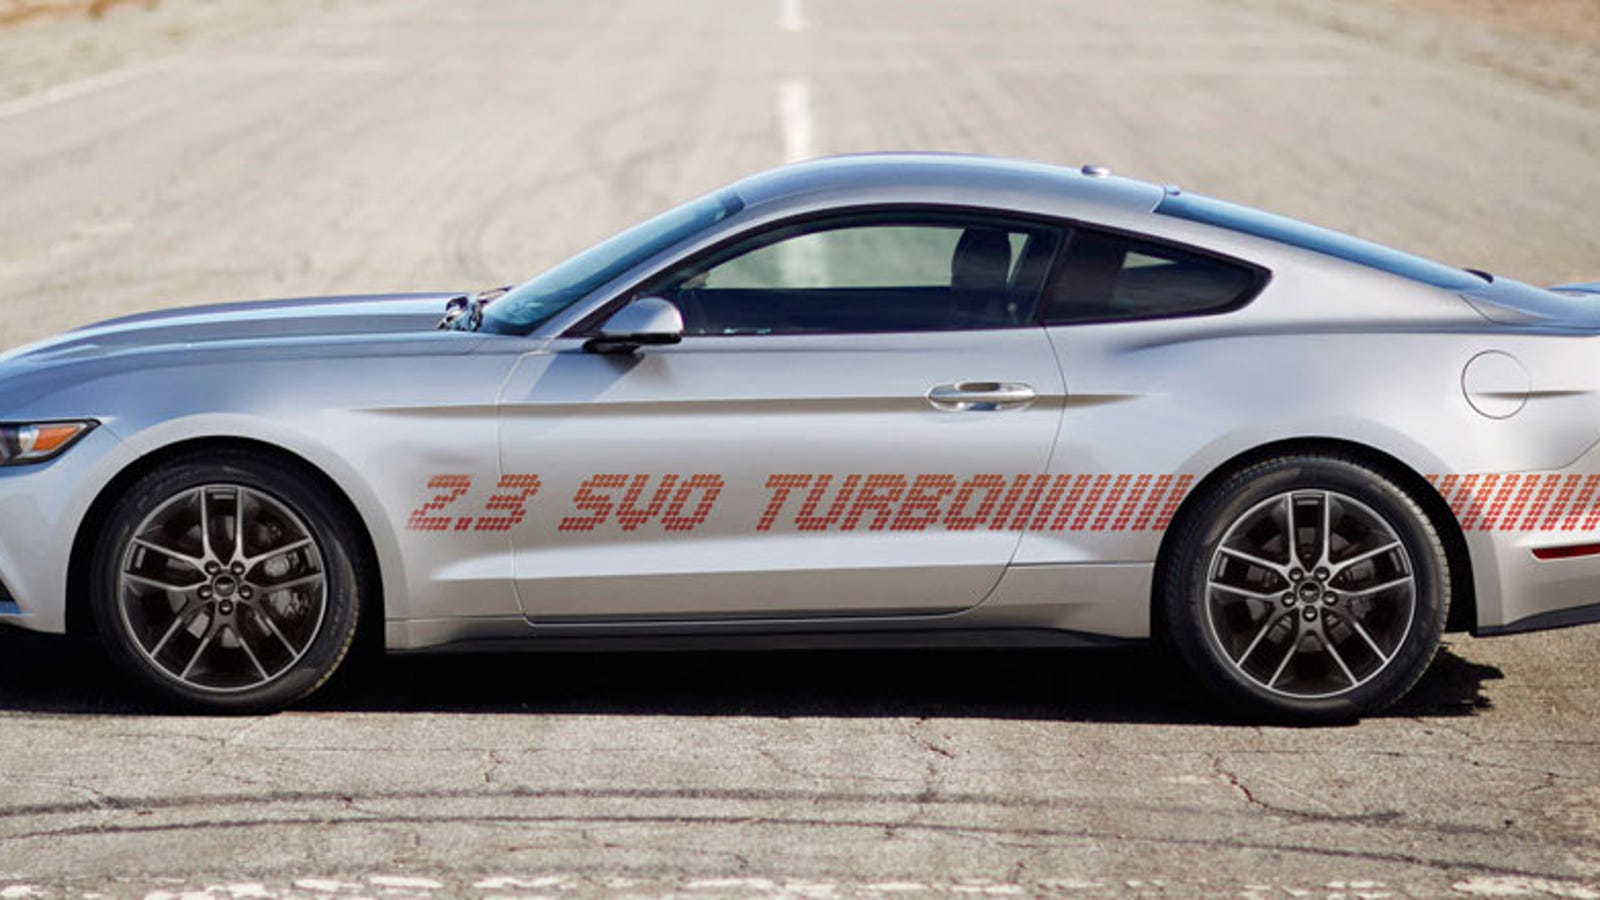 Mustang EcoBoost Is A Terrible Name, Let's Come Up With A Better One